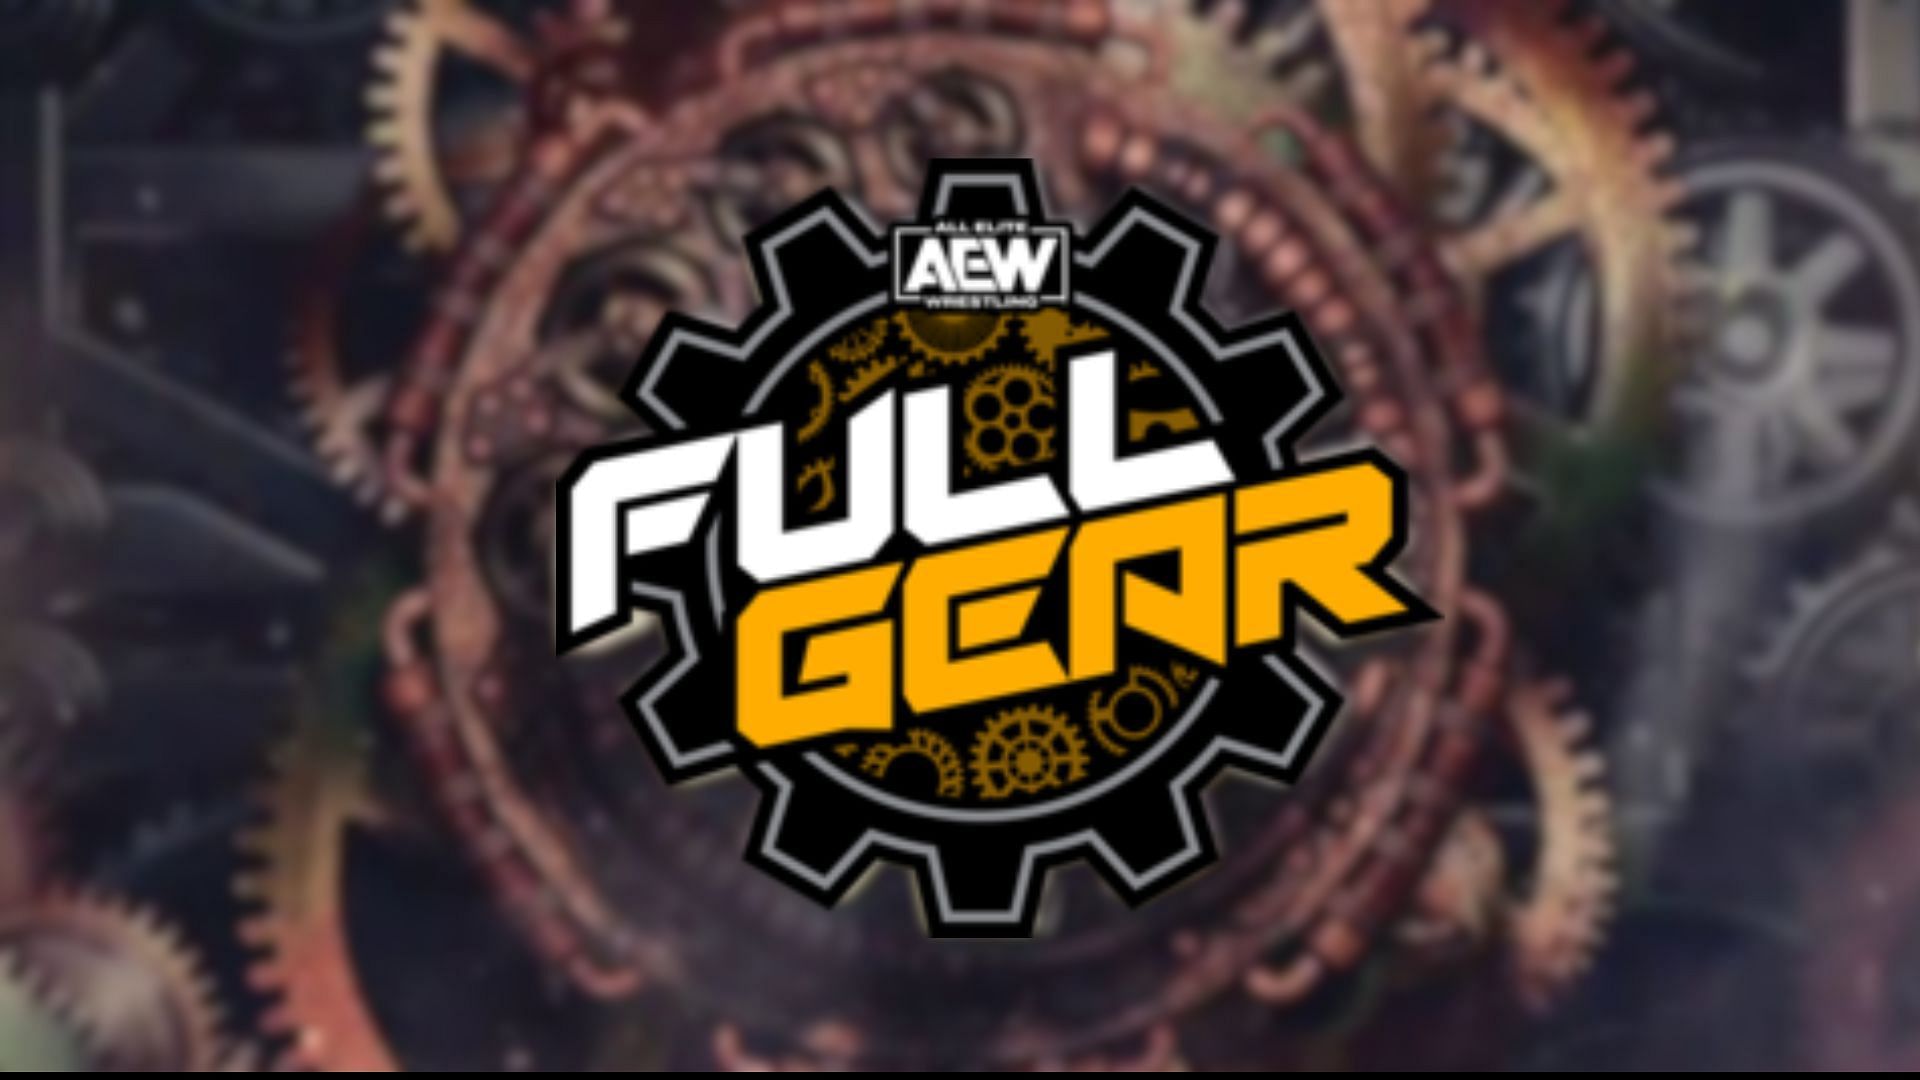 AEW Full Gear 2023 will take place in Los Angeles, California